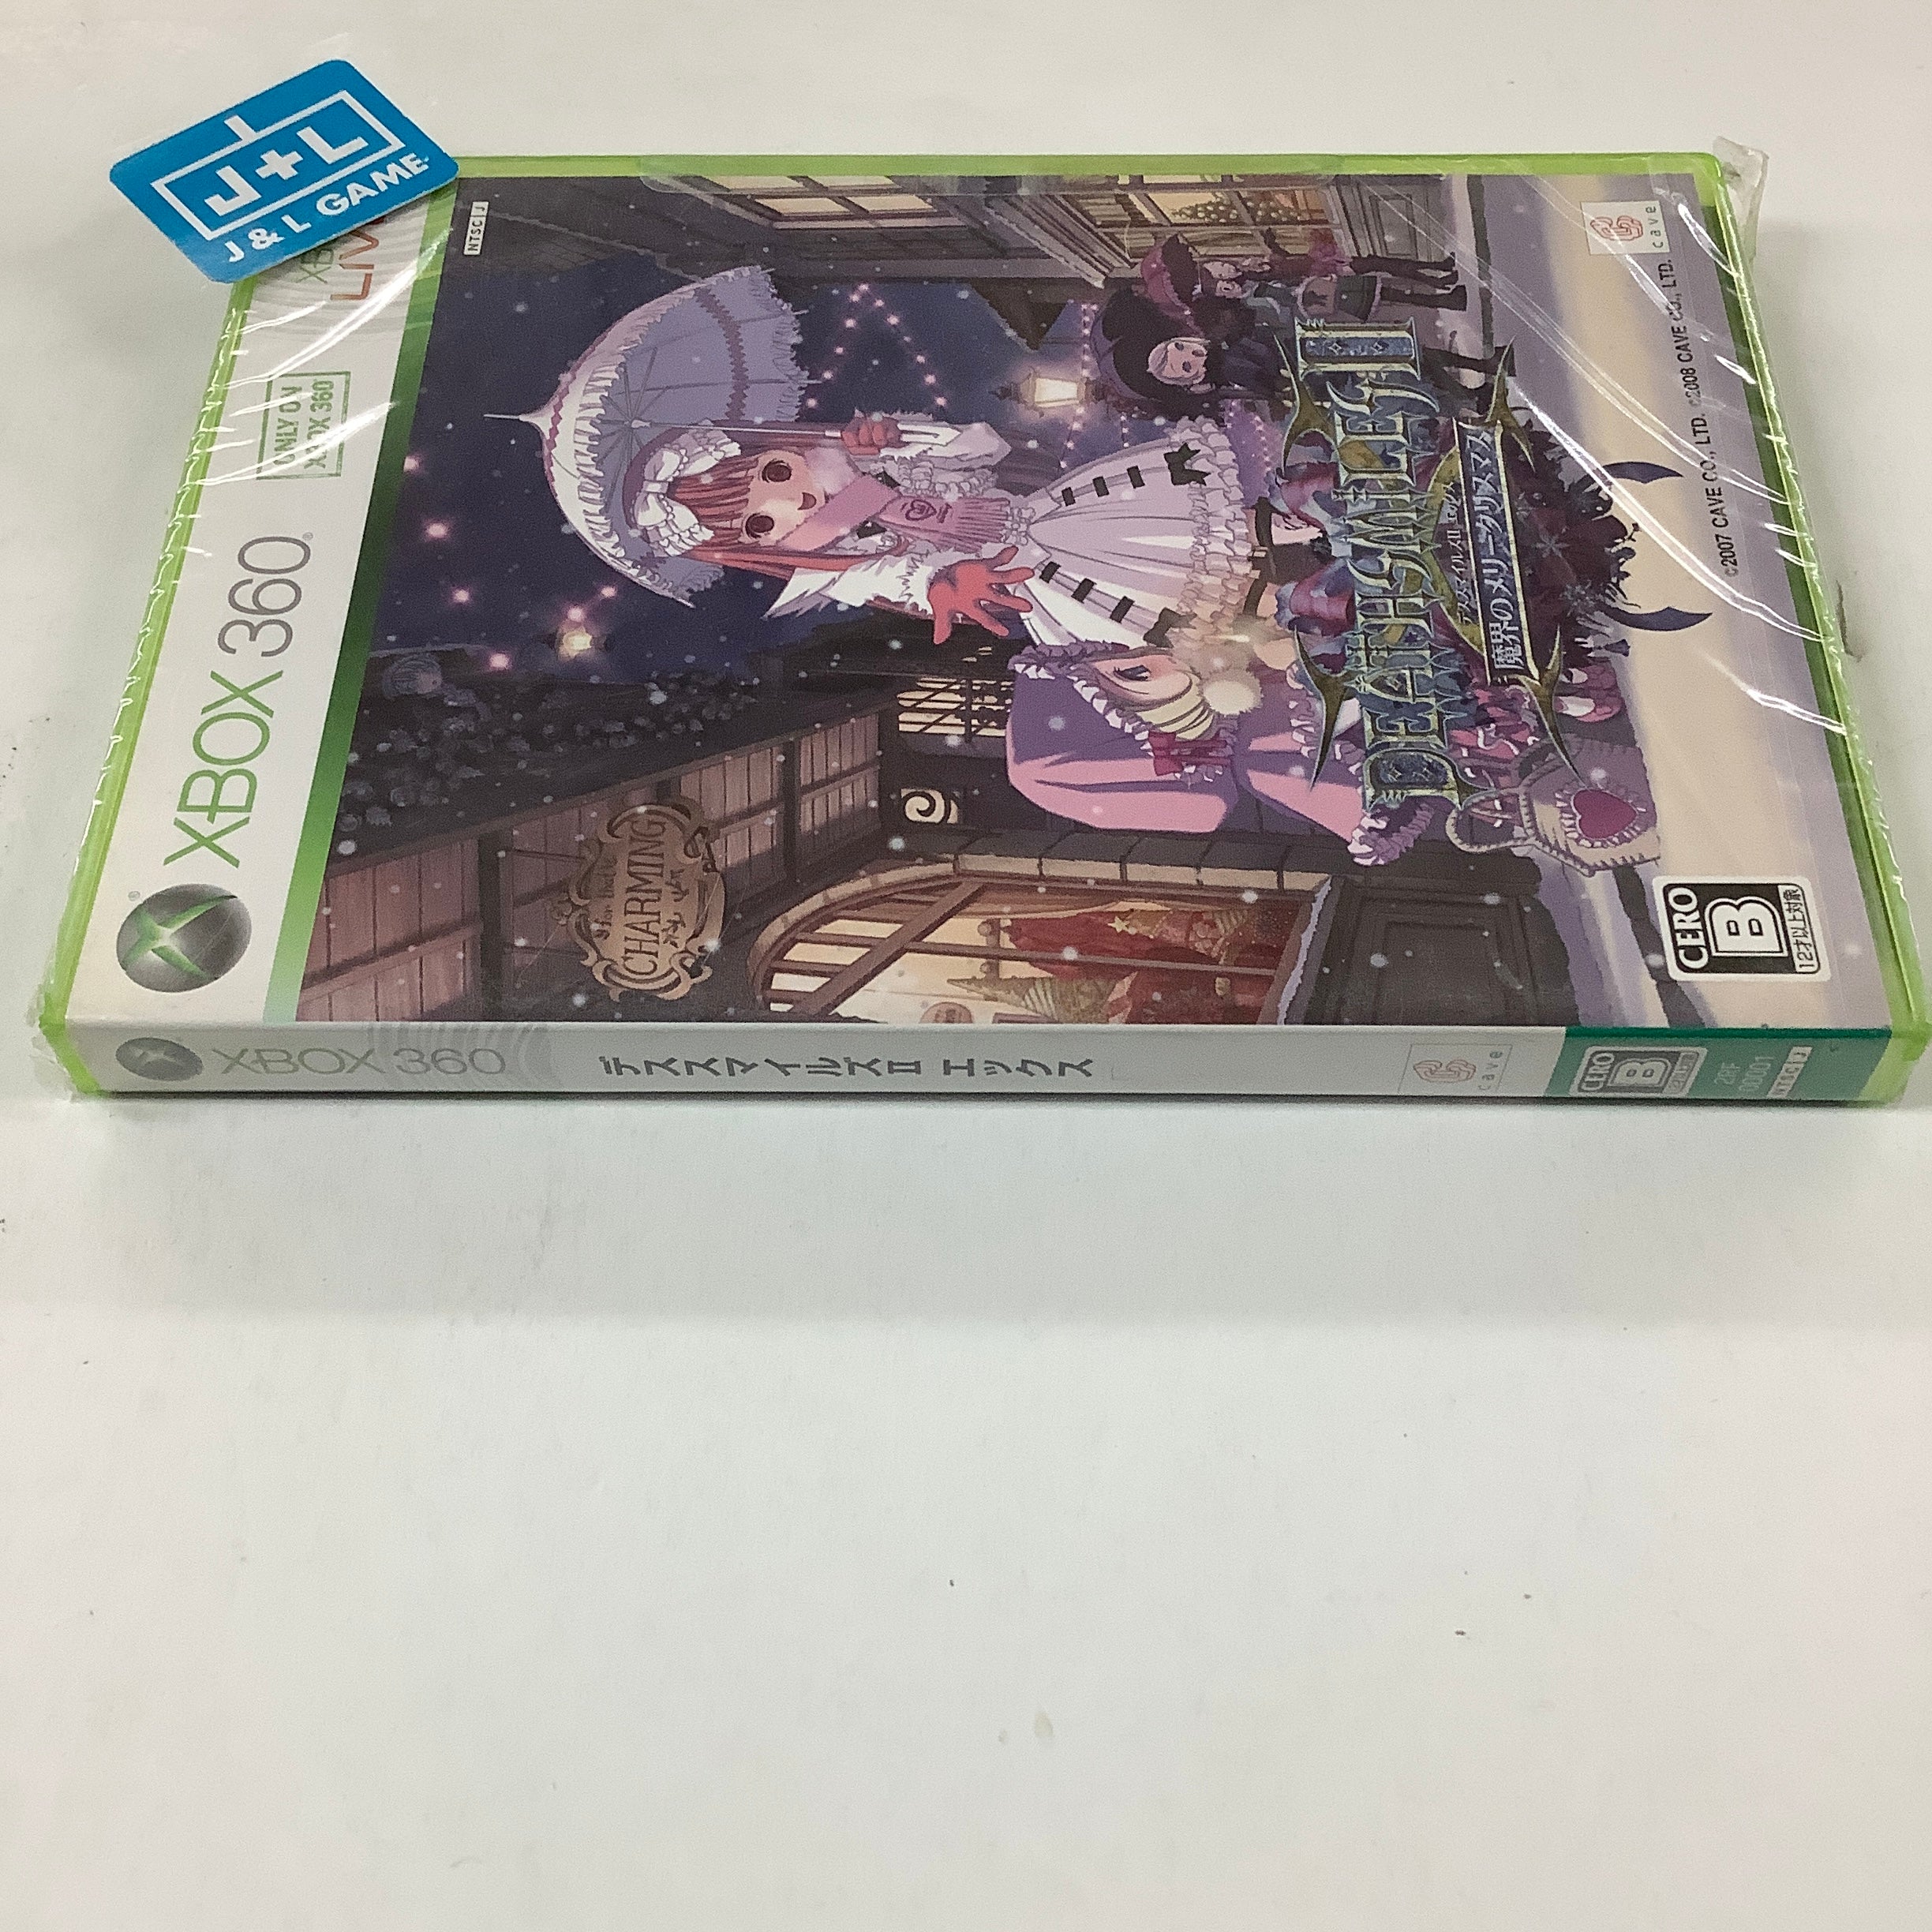 Deathsmiles II X: Makai no Merry Christmas - Xbox 360 (Japanese Import) Video Games Cave   